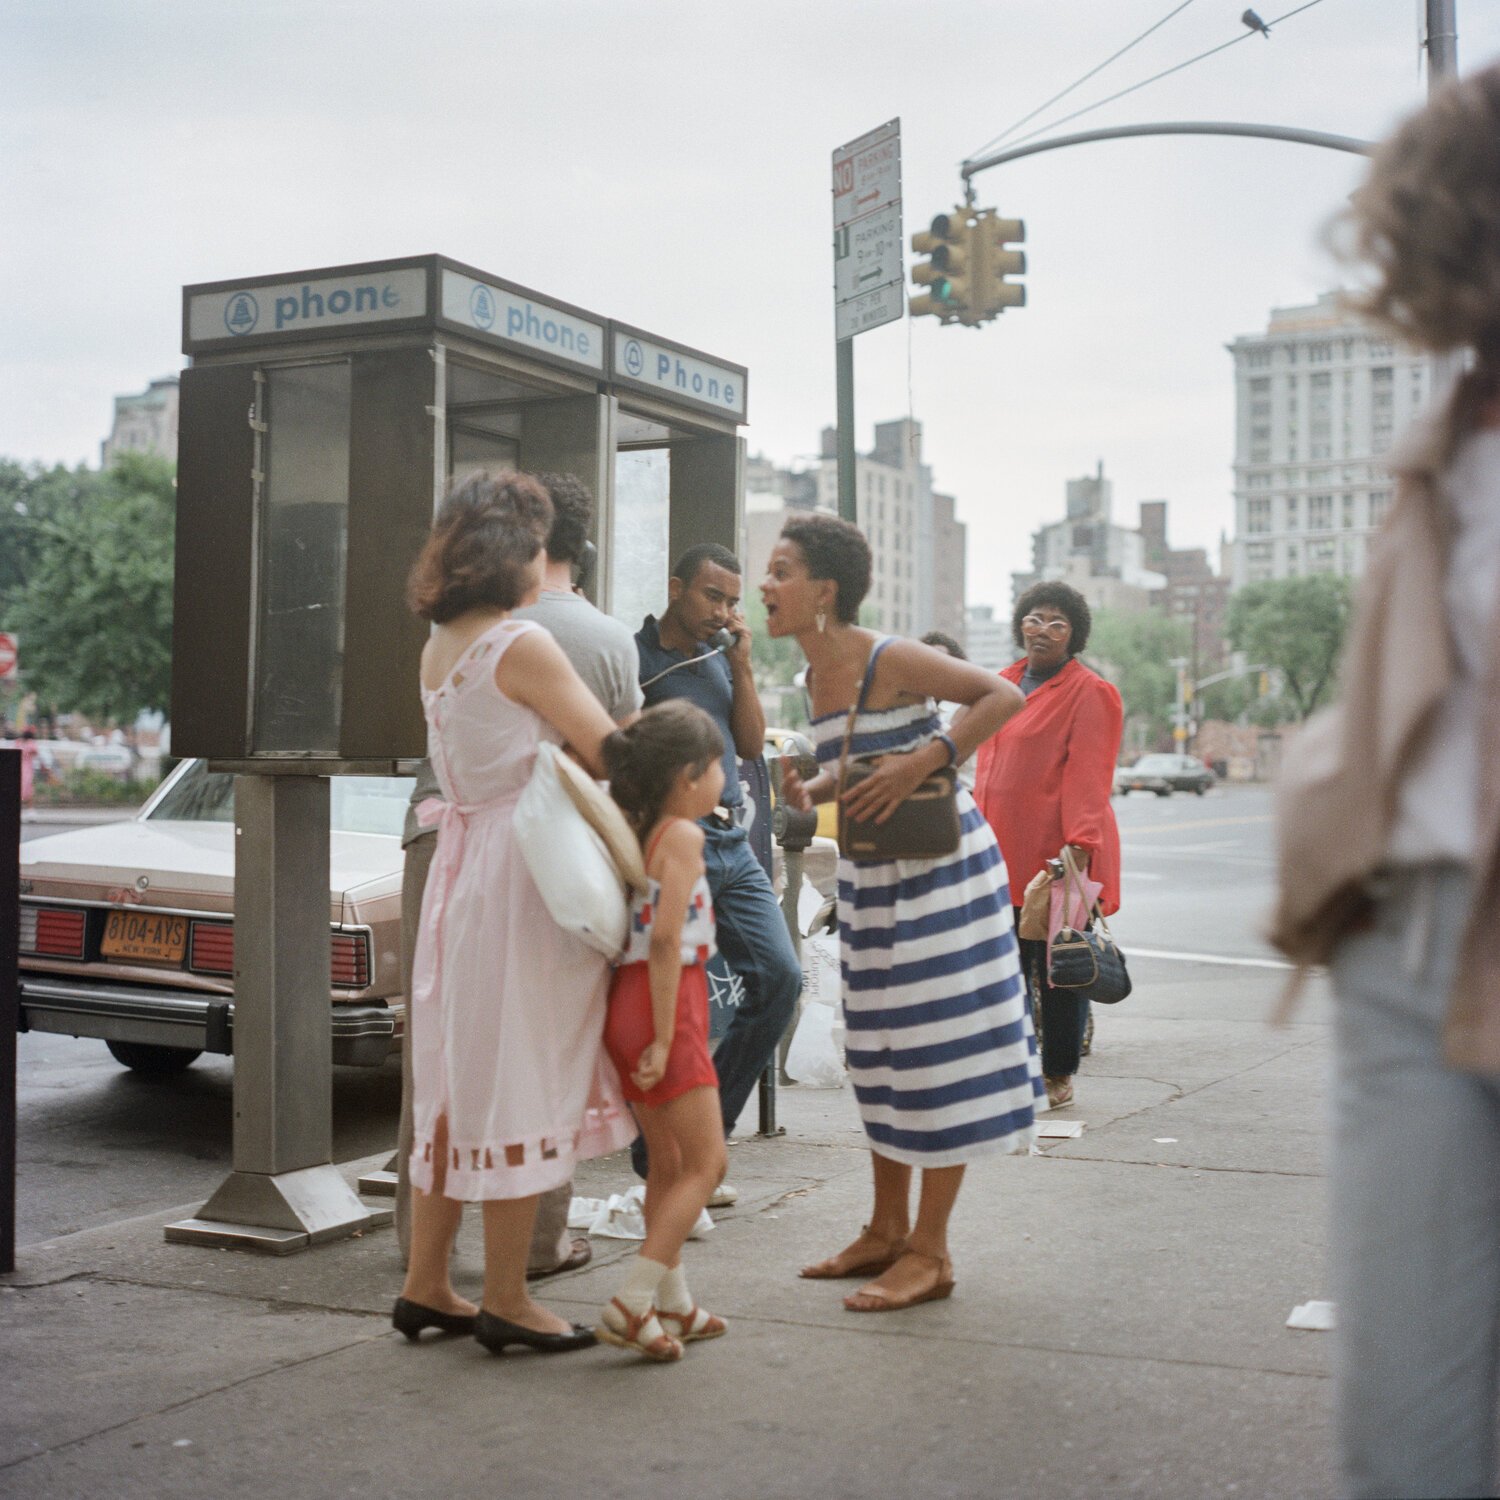 An Argument by the Pay Phone, 1985.